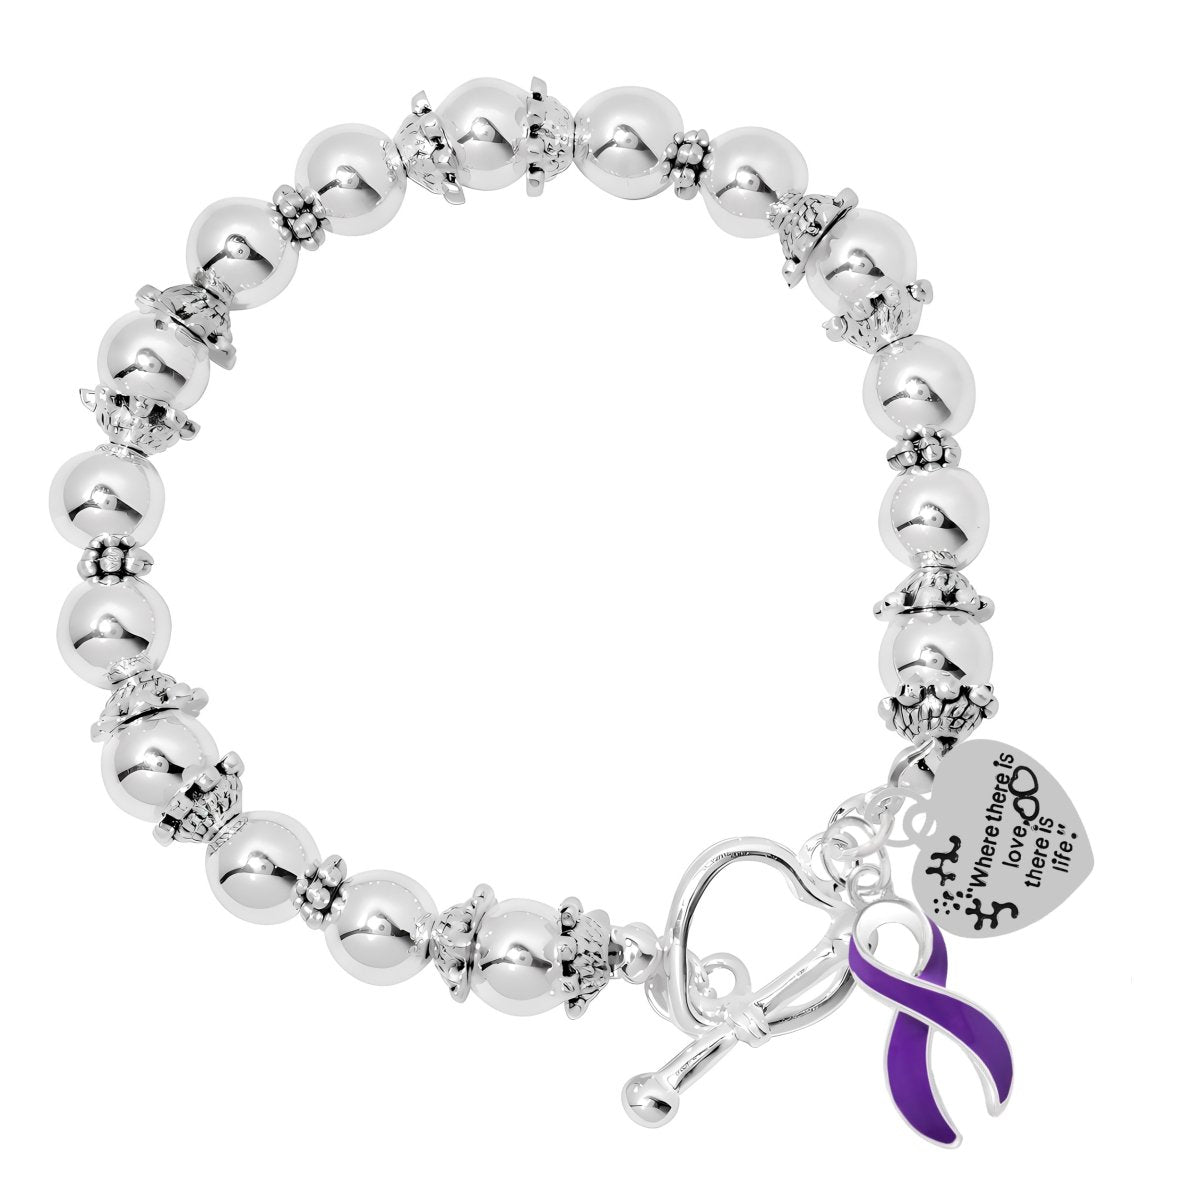 Where There is Love Purple Ribbon Bracelets - Fundraising For A Cause